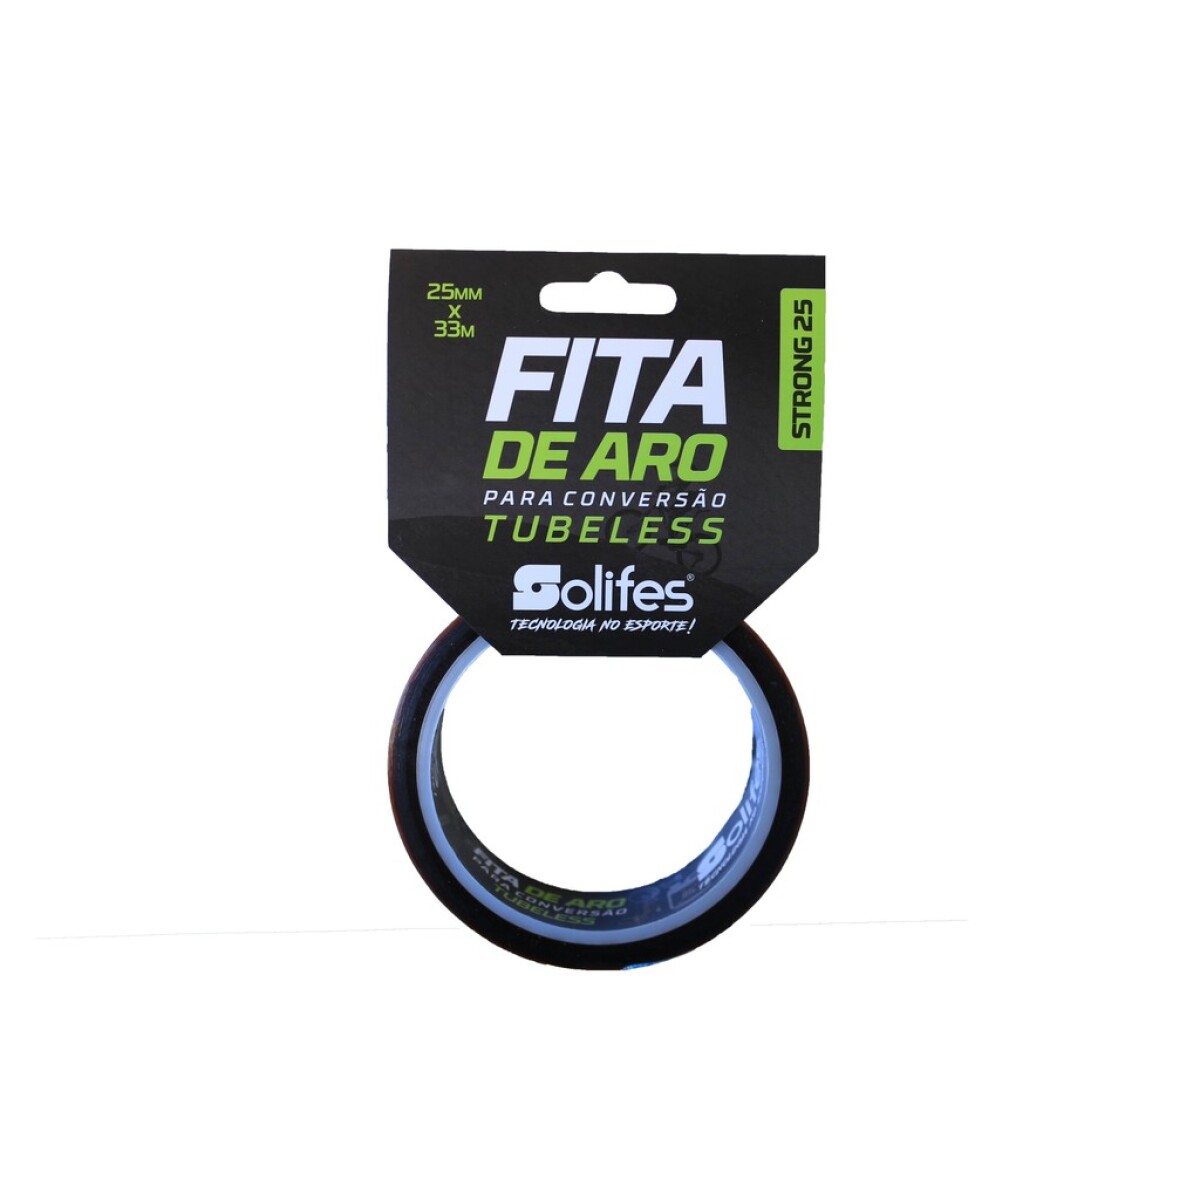 Cinta Tubeless Solifes 15m X 28mm 100% Polyester 